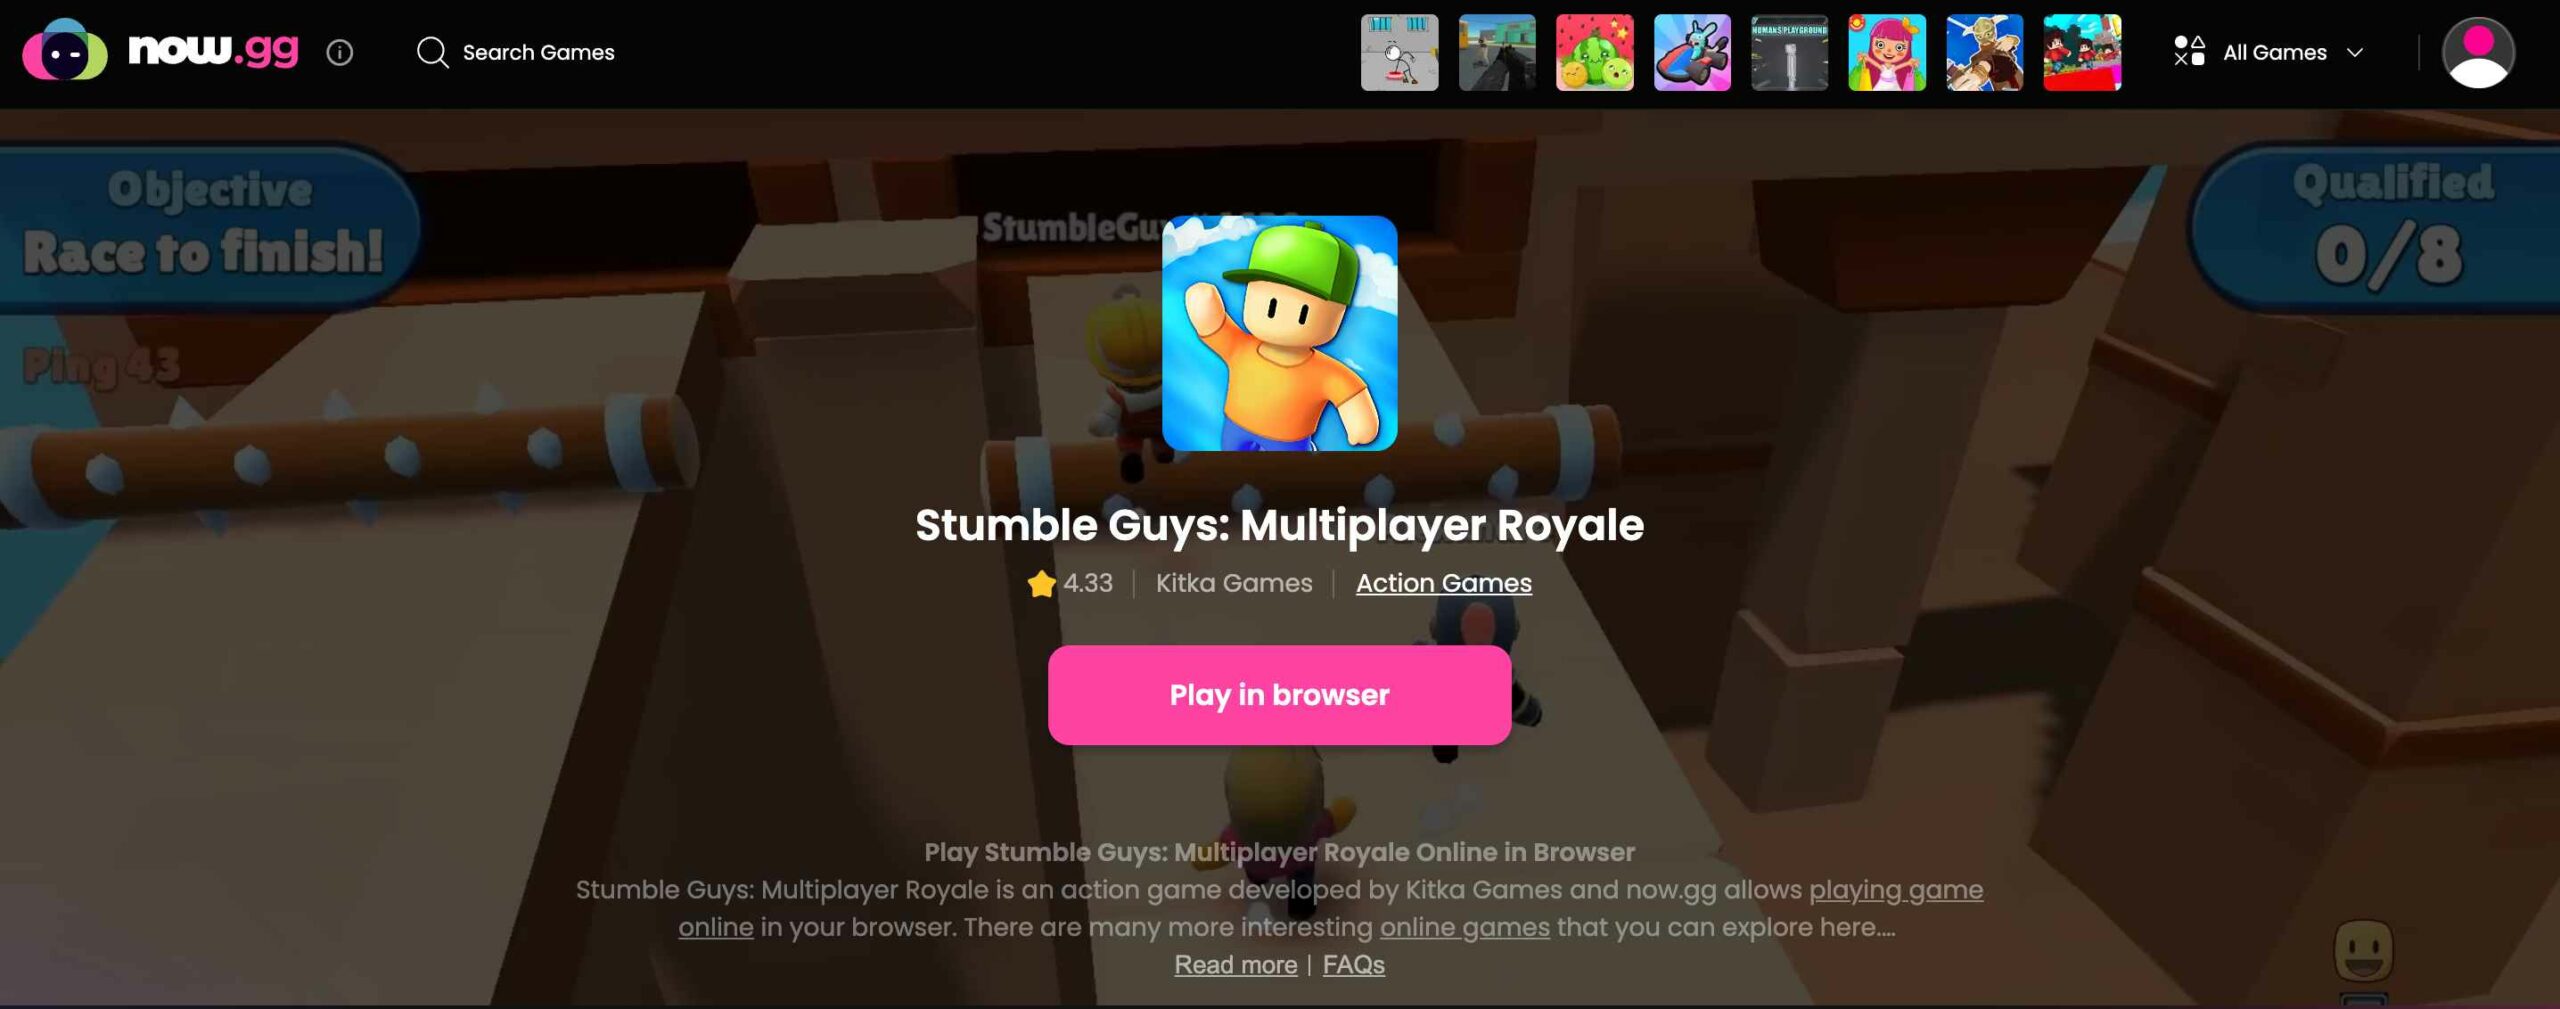 Everything You Need to Know About Playing Stumble Guys on Now.gg